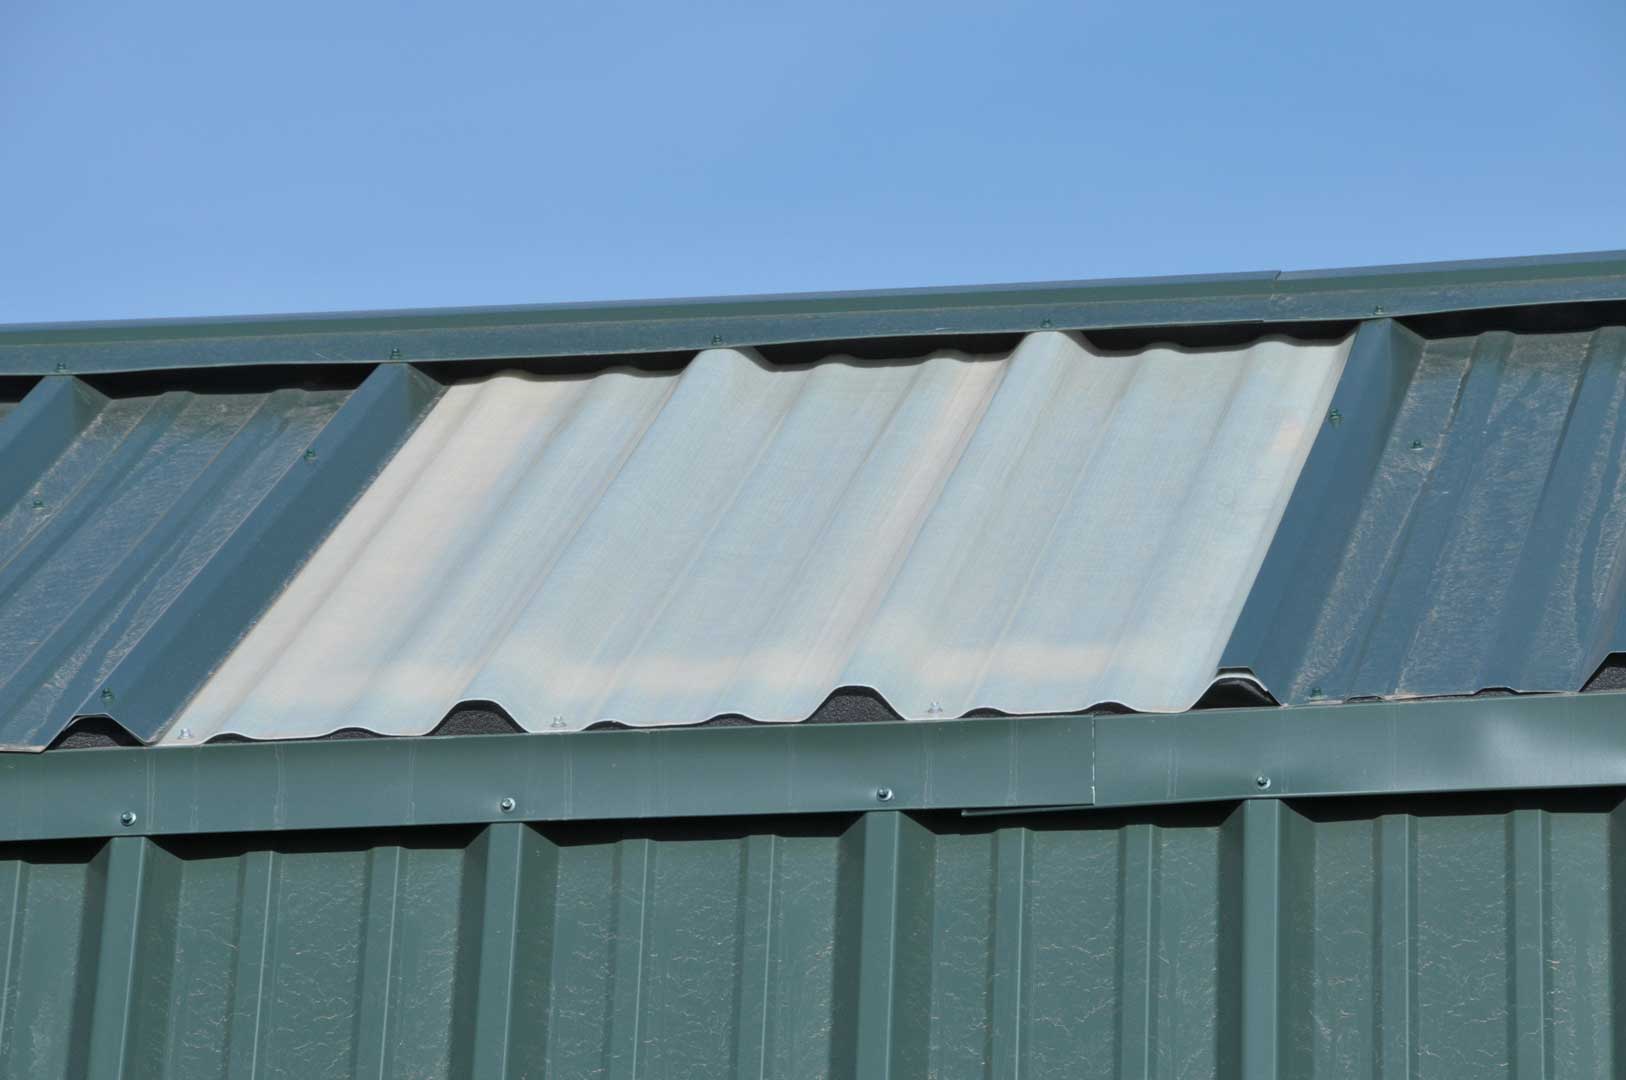 How To Install A Metal Roof Instead Of Shingles On Your Shed?